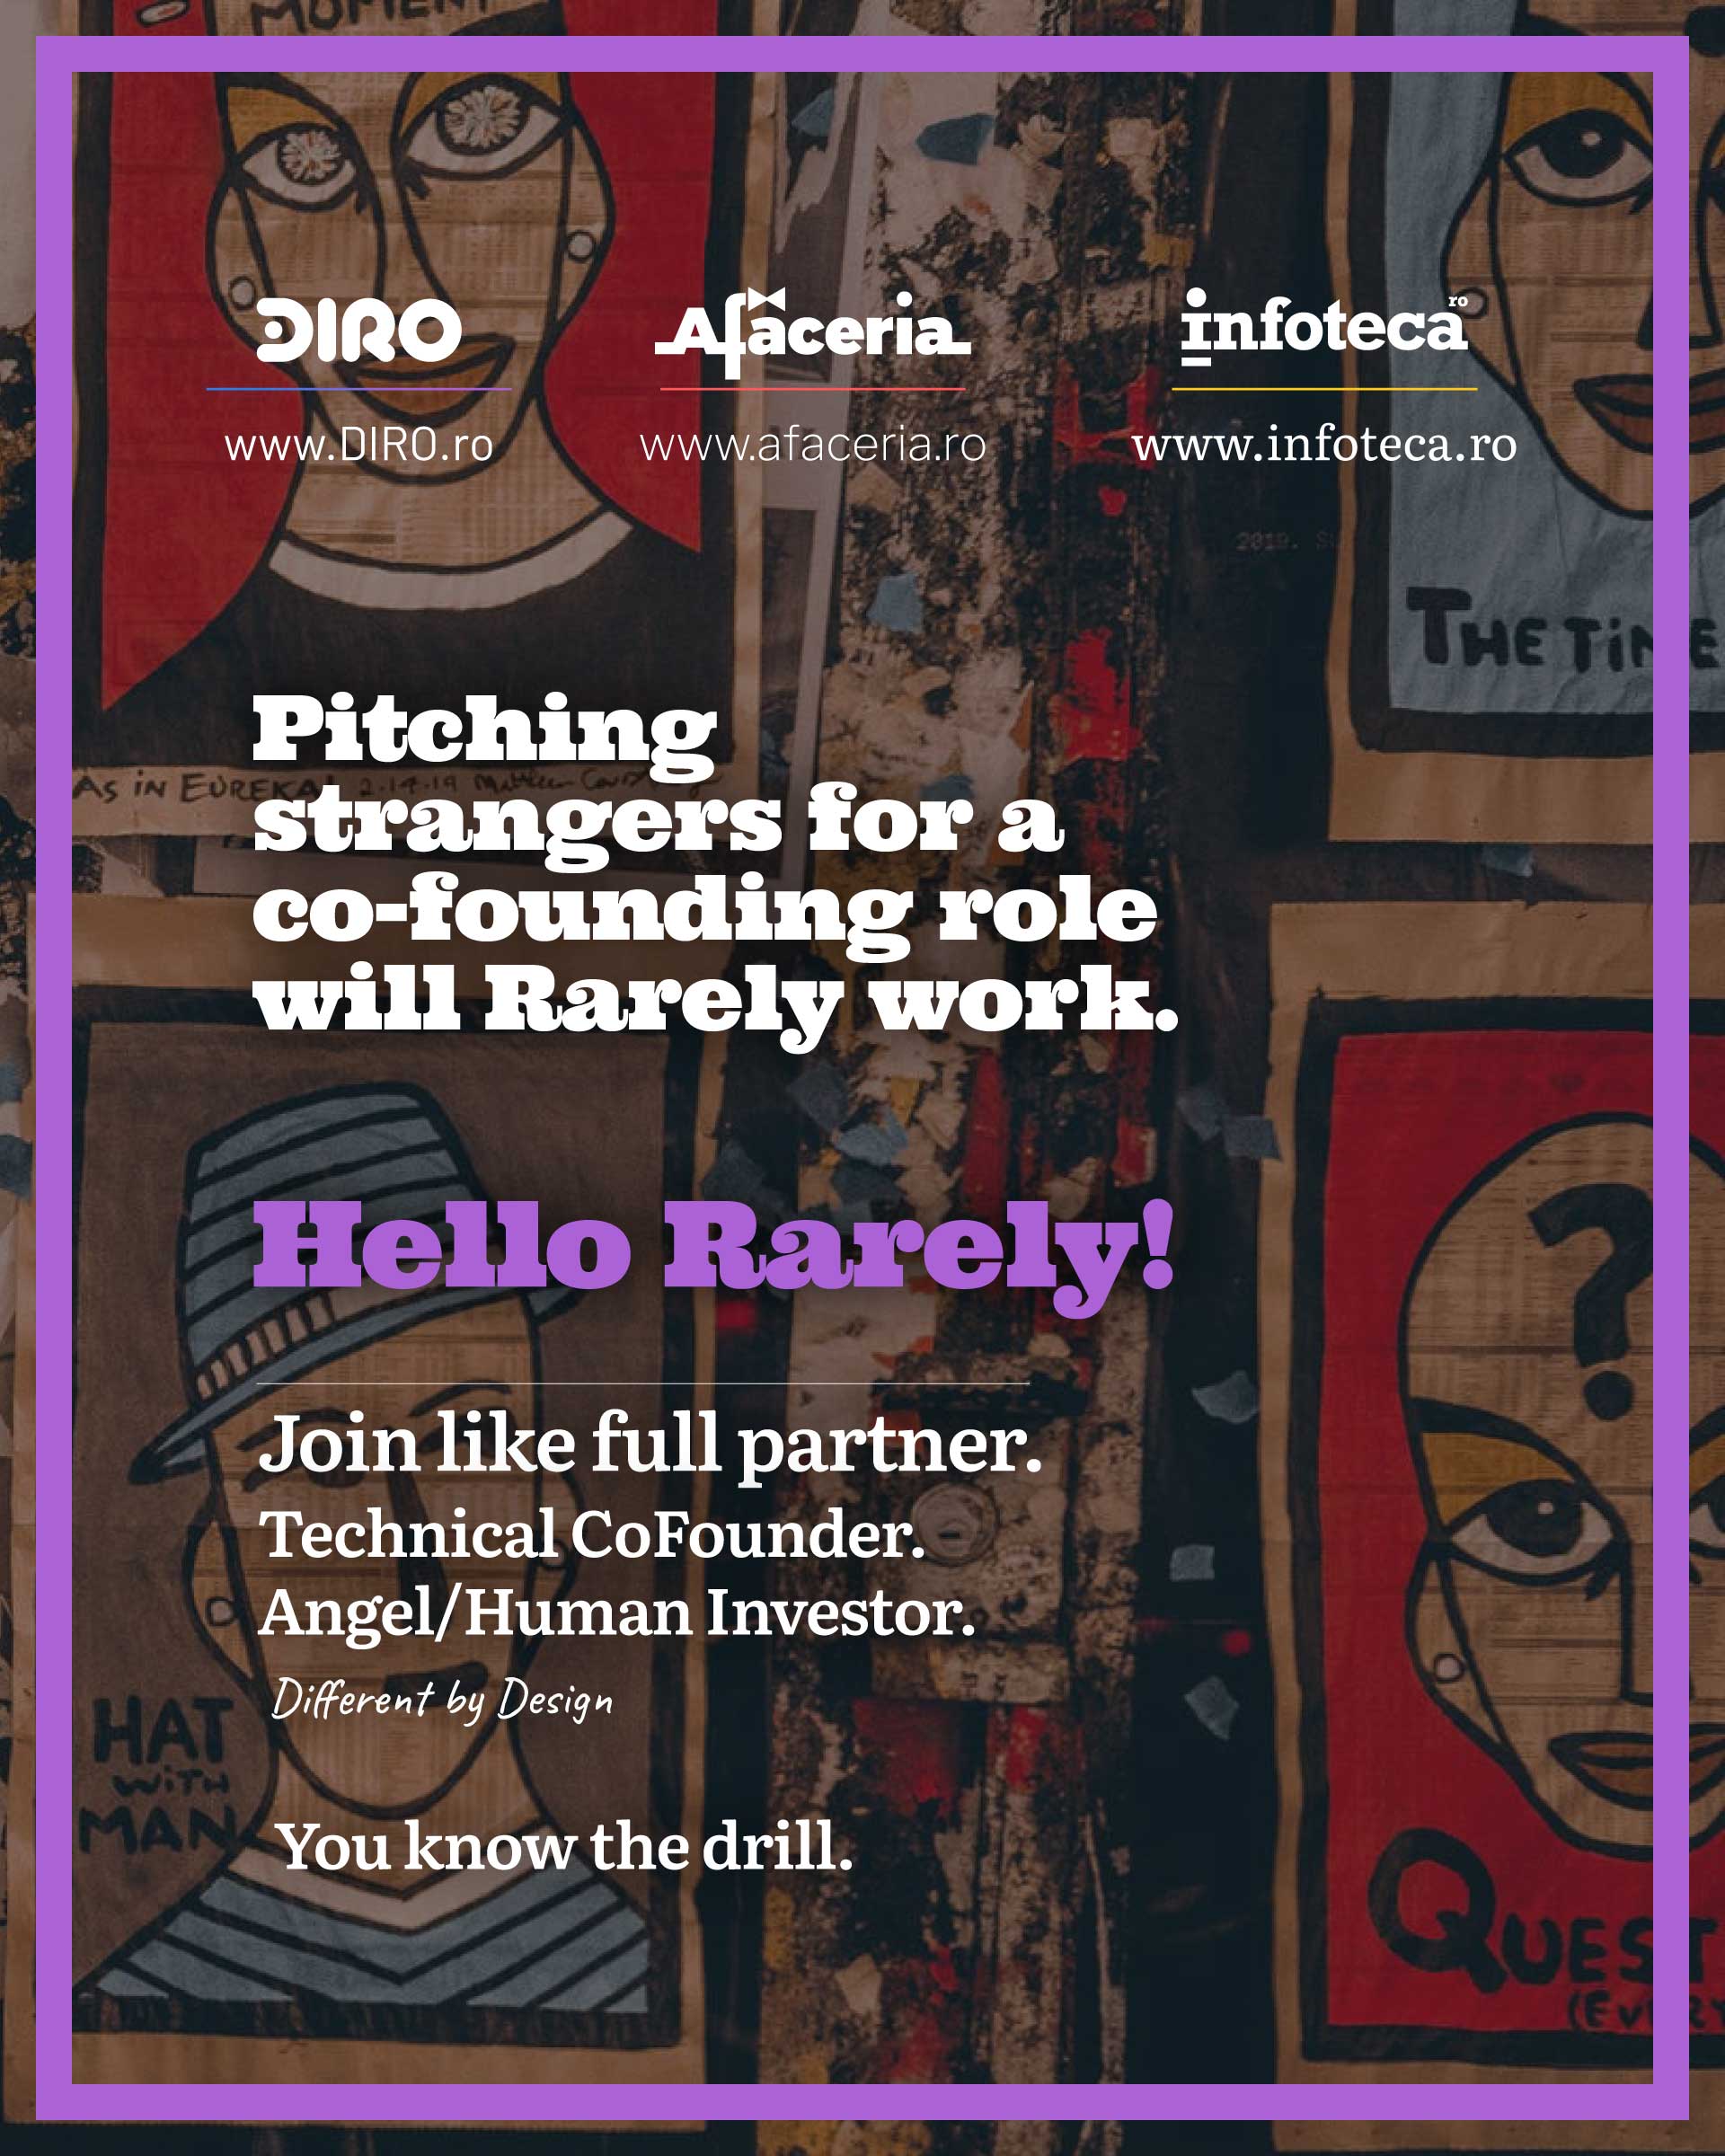 Pitching strangers for a co-founding role will Rarely work. Hello Rarely!